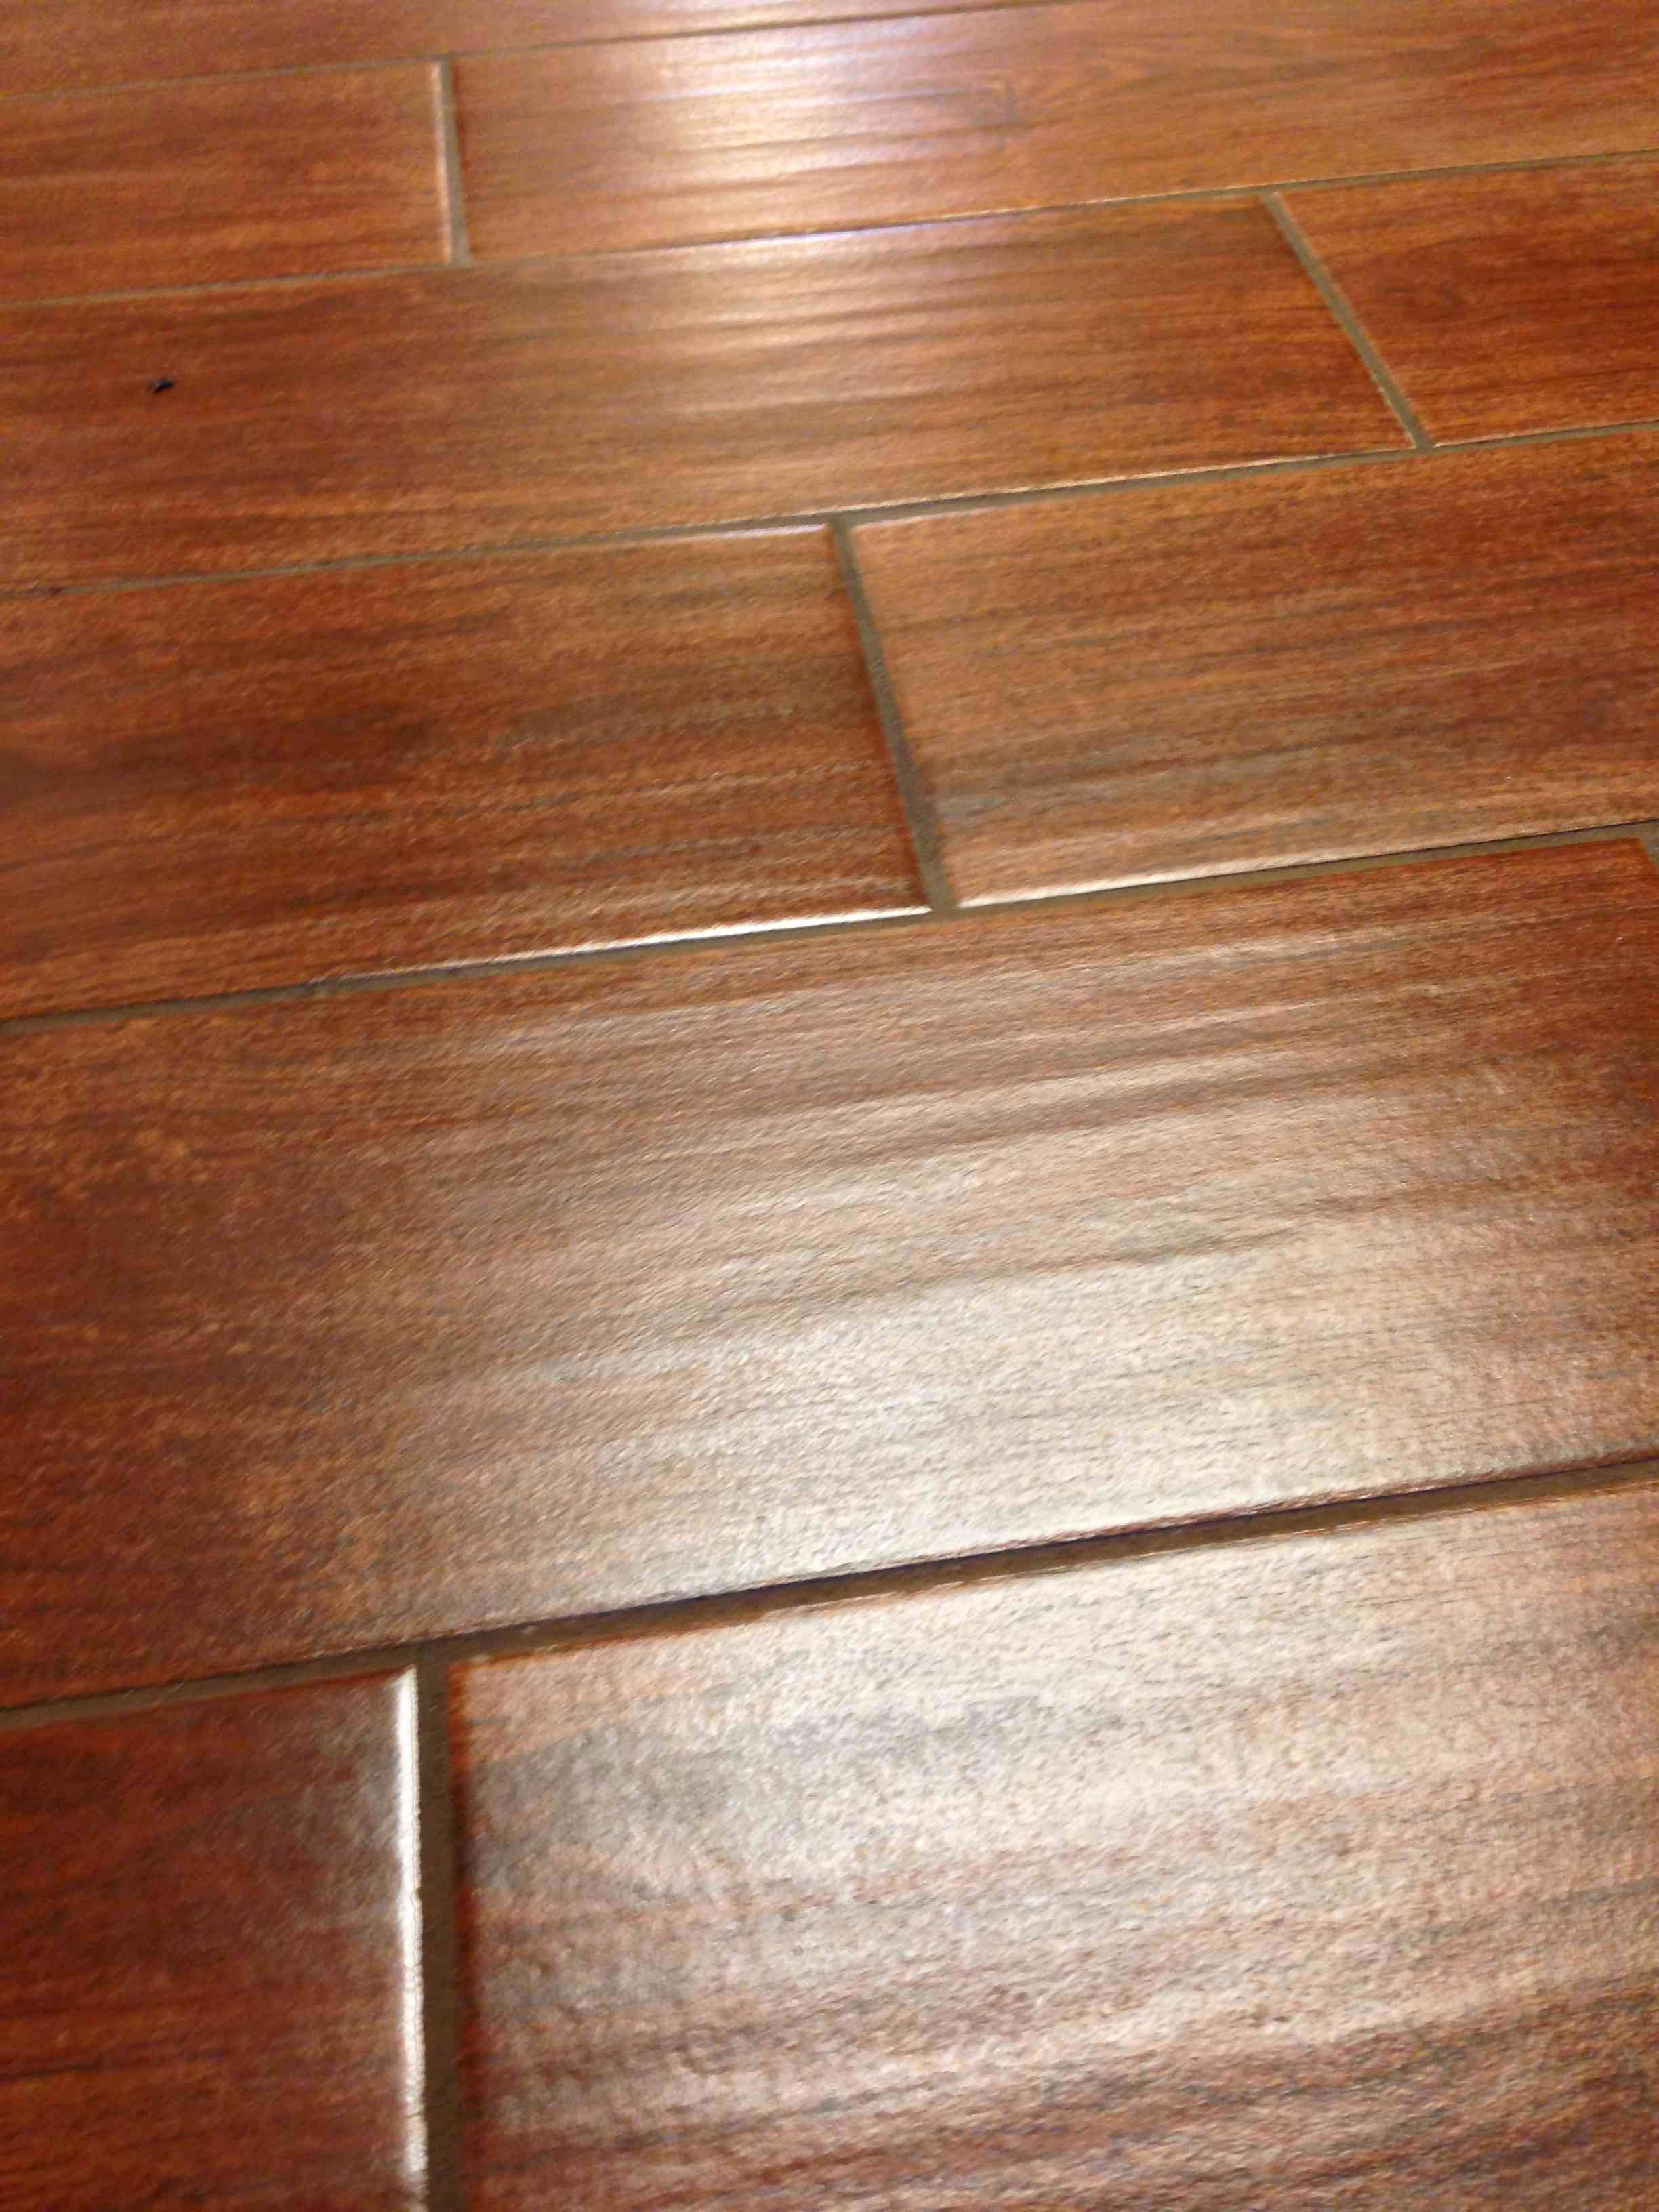 21 Nice Types Of Hardwood Floors Pictures 2024 free download types of hardwood floors pictures of the wood maker page 2 wood wallpaper within hardwood floor store 50 best real hardwood floors 50 s floor plan ideas of wood floor